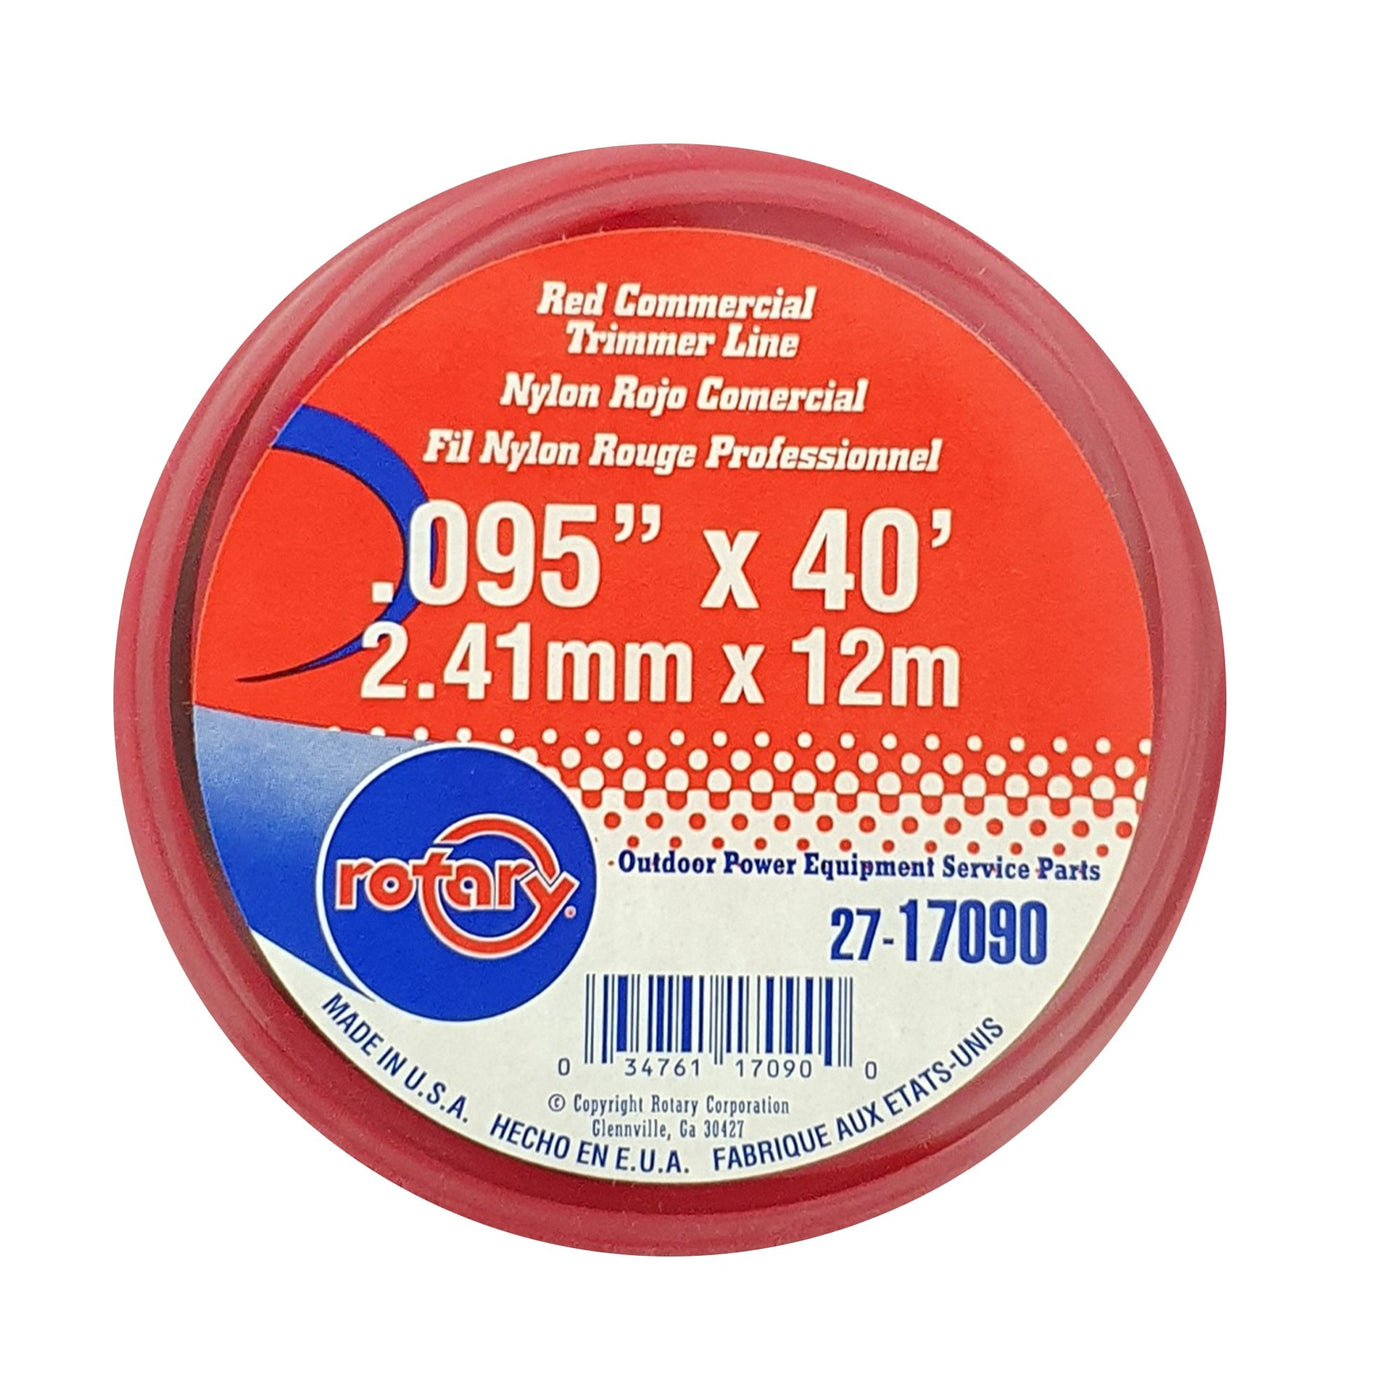 Replacement line 2.4mm Round x 12m - Solo New Zealand